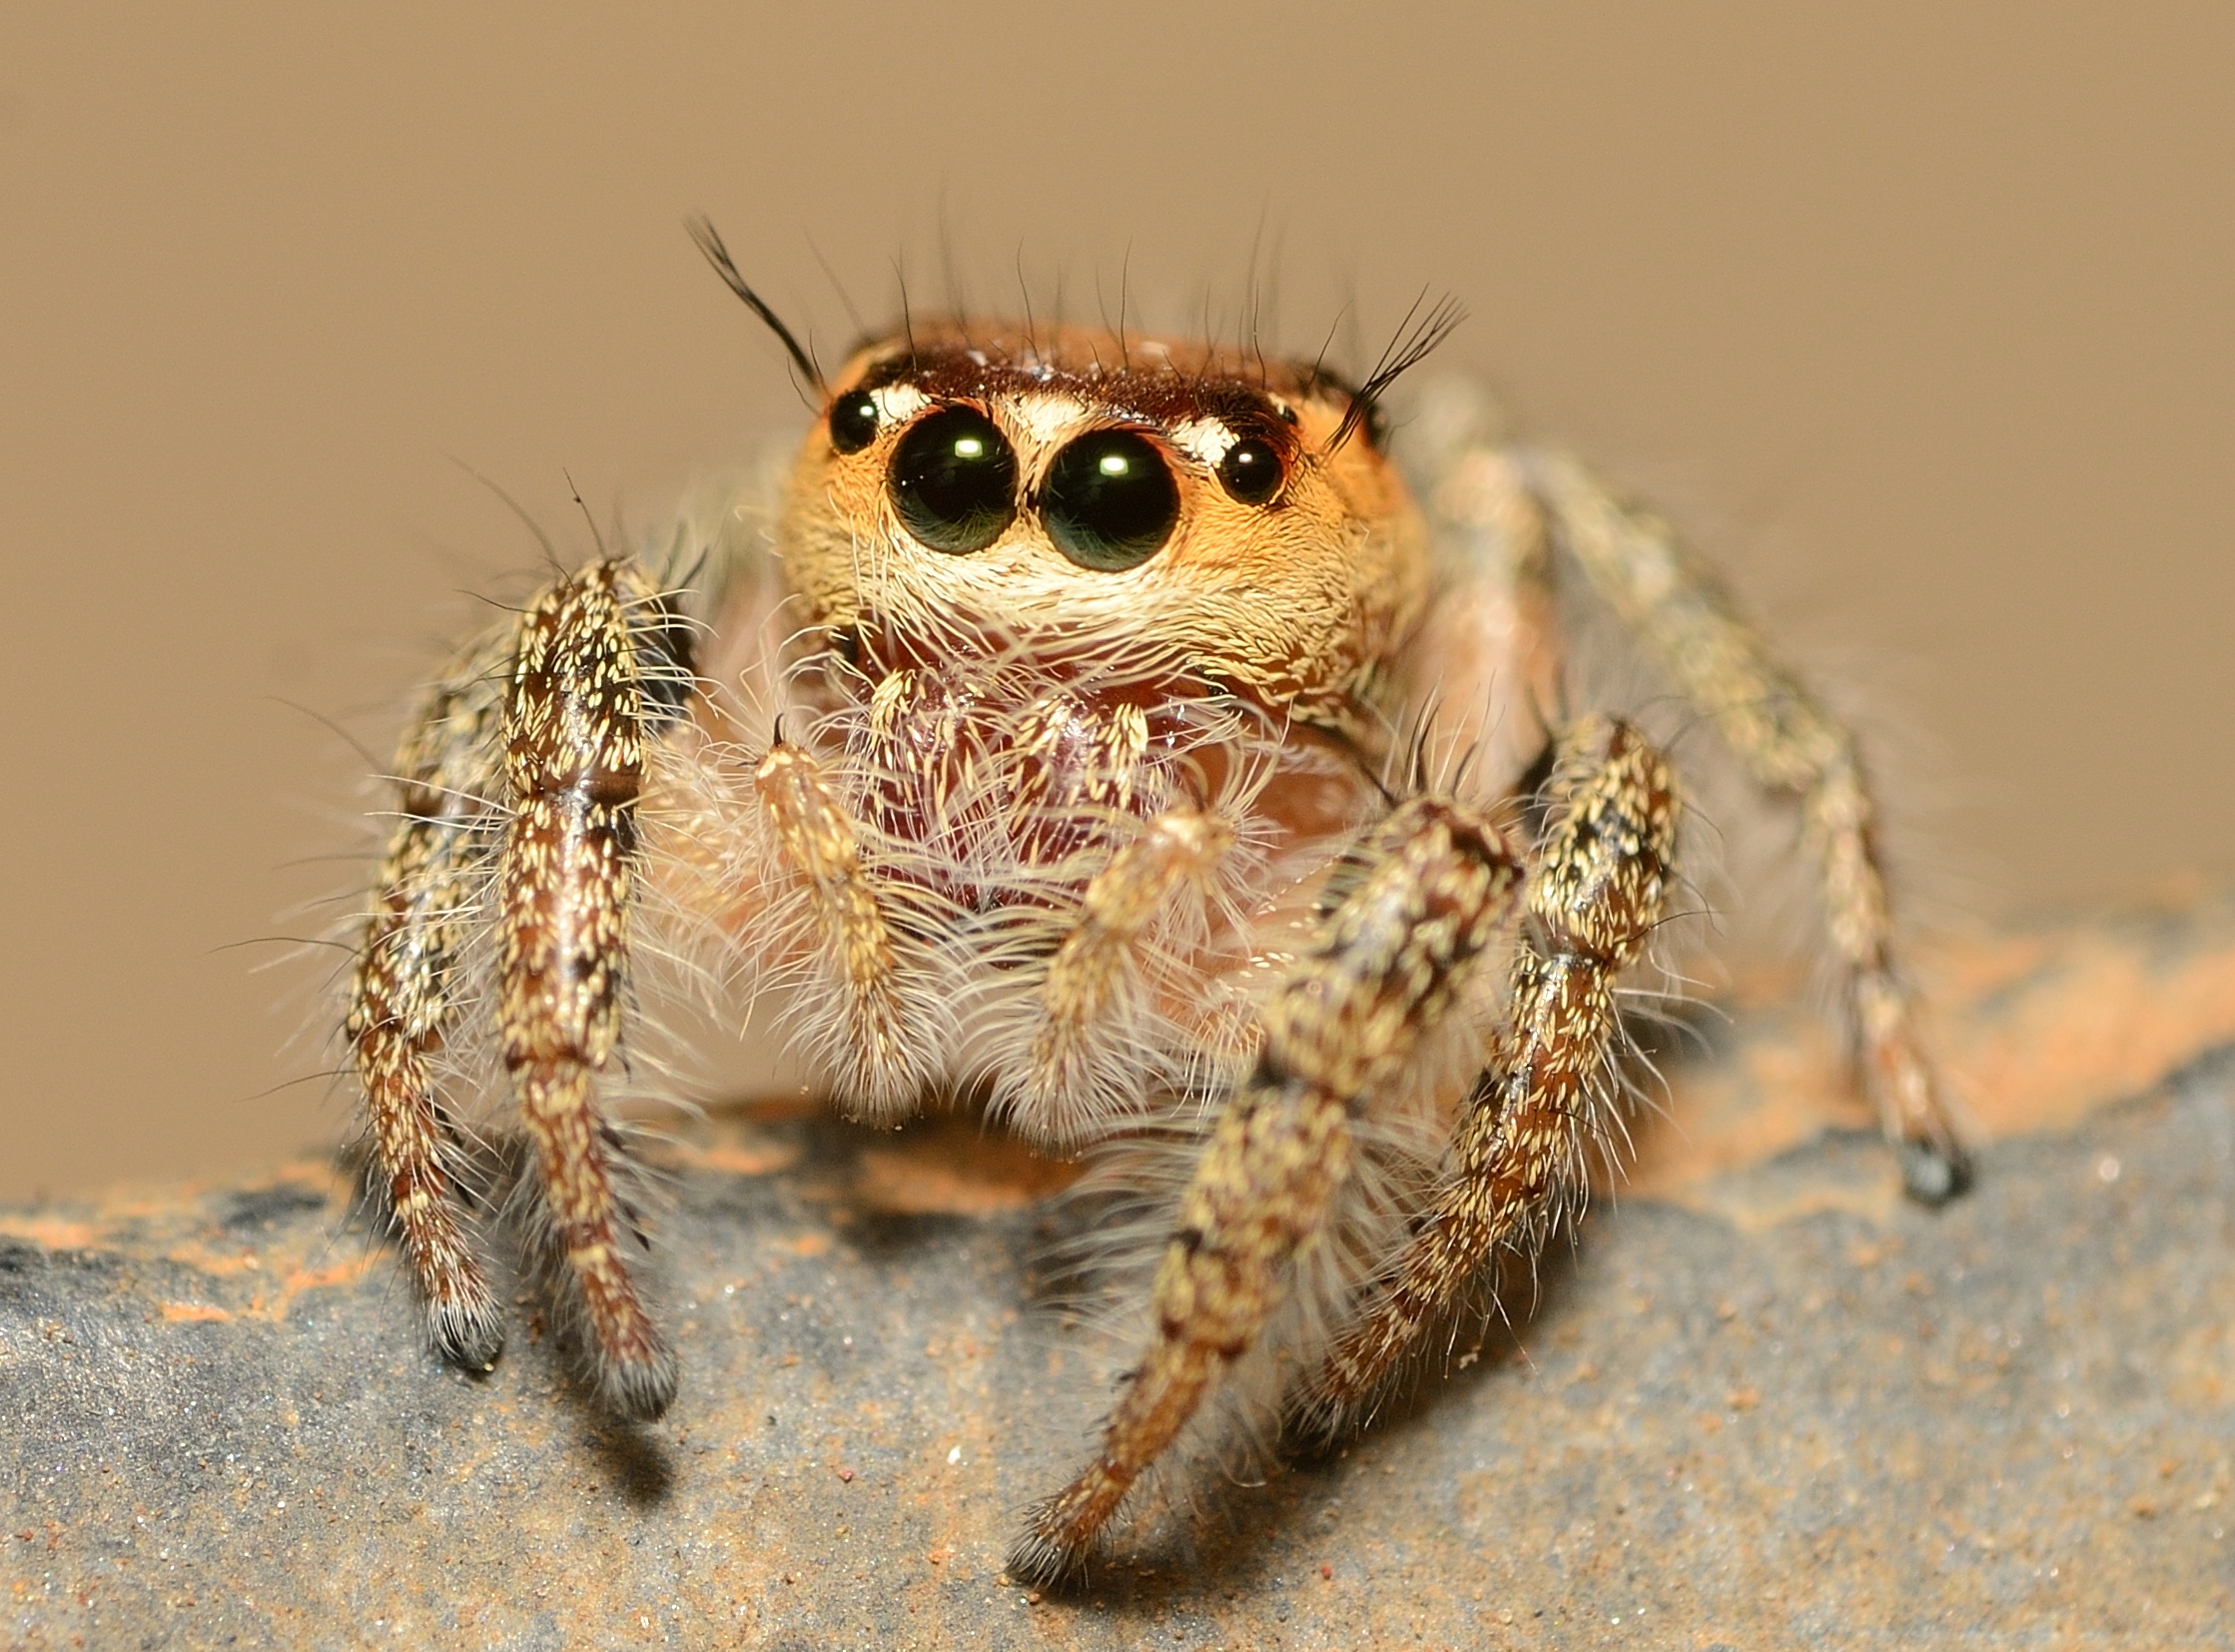 Wallpaper, portrait, India, macro, cute, animals, jumping, eyes, spiders, insects, colourful, d jumpingspidersinindia 2238x1654